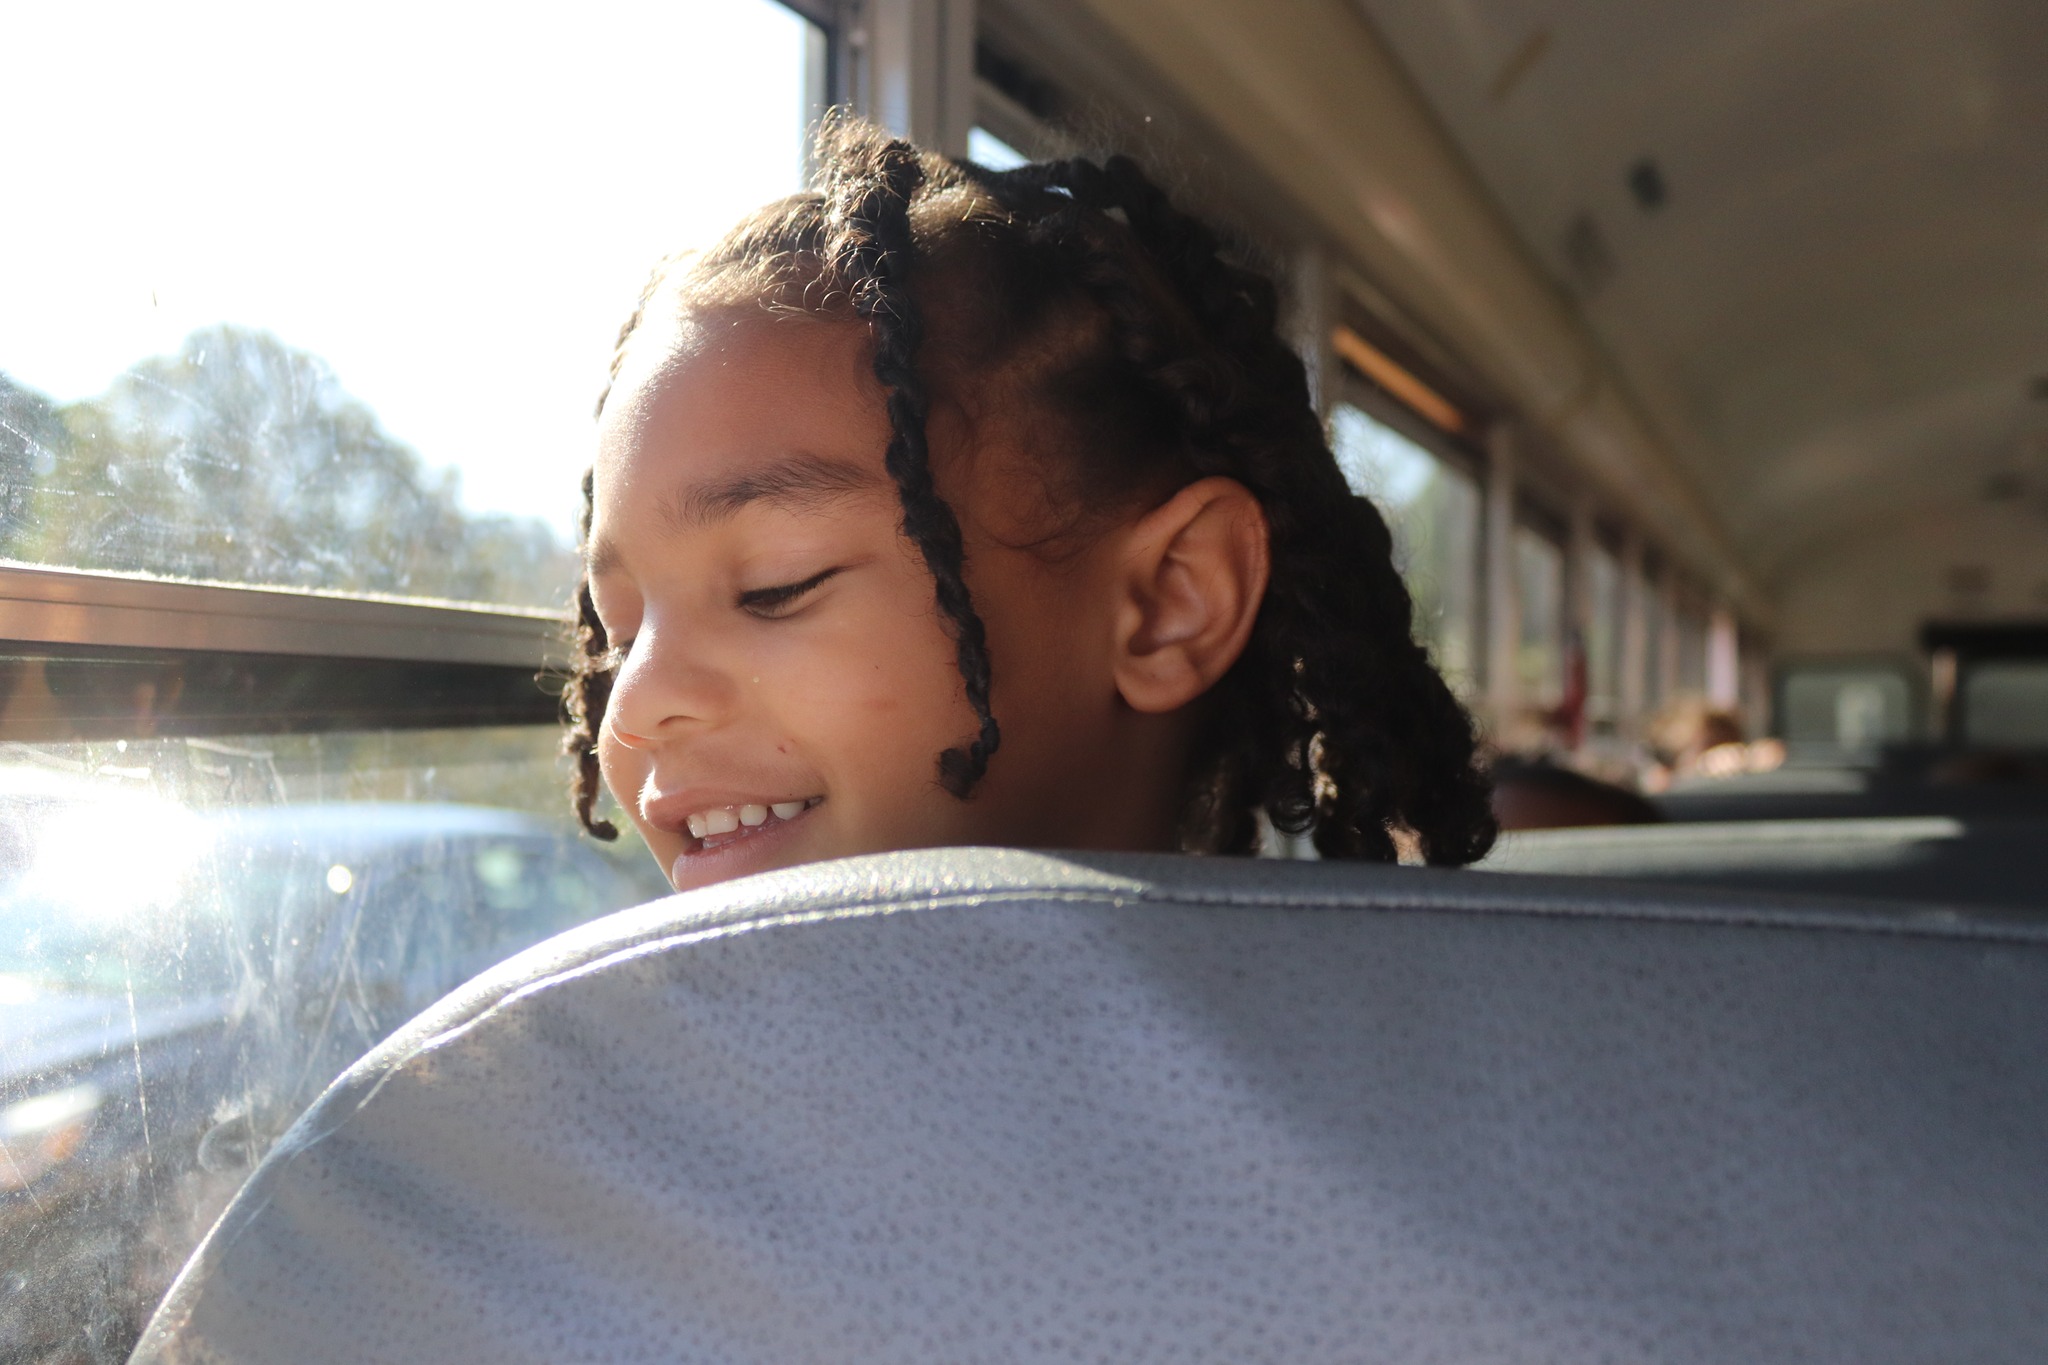 A student peers over a bus seat